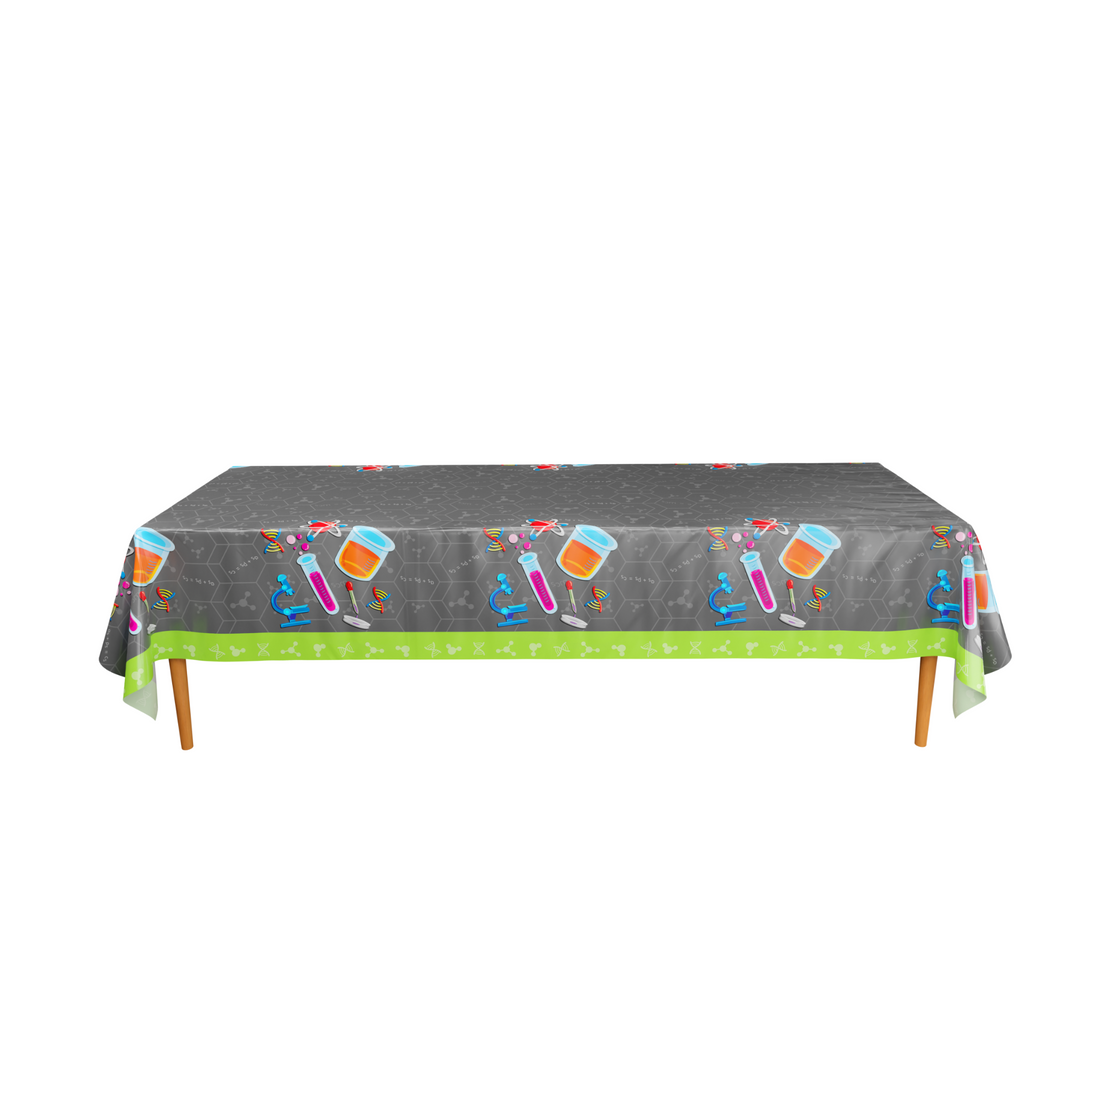 Get Your Lab Ready for Fun with Discount Party Supplies' Science Table Covers!